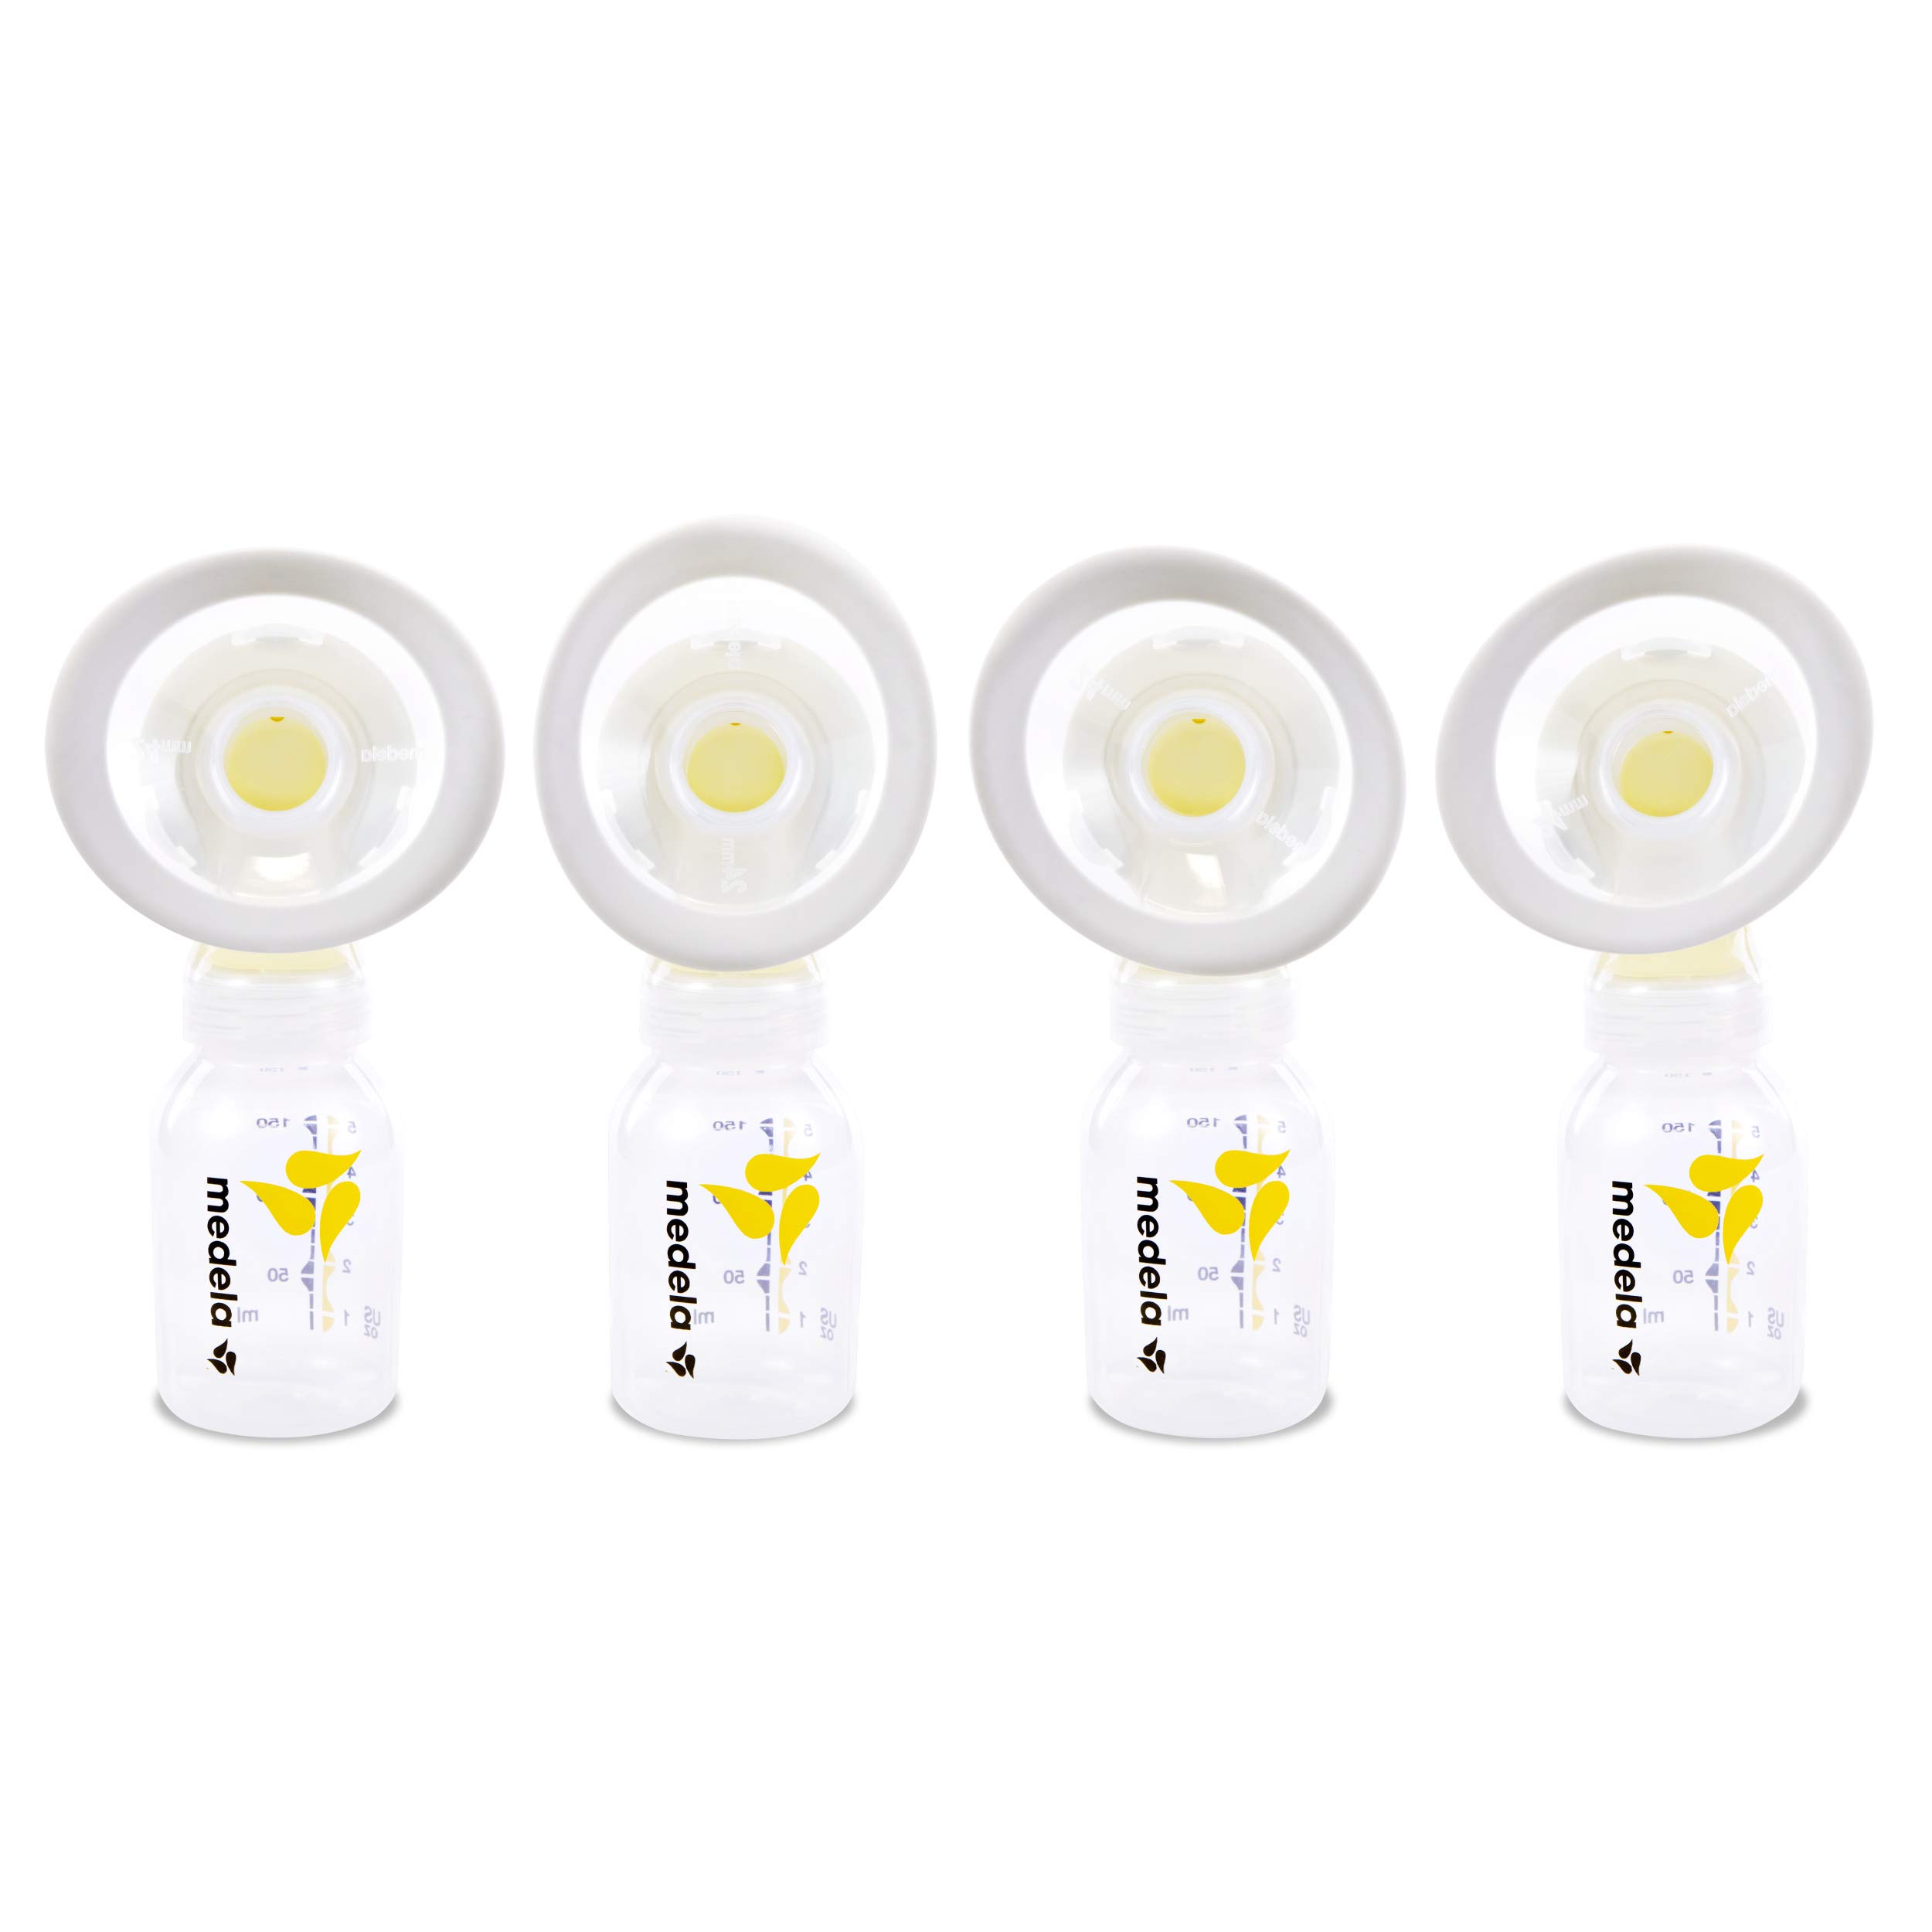 Medela PersonalFit Flex Breast Shields, 2 Pack of Large 27mm Breast Pump Flanges, Made Without BPA, Shaped Around You for Comfortable and Efficient Pumping